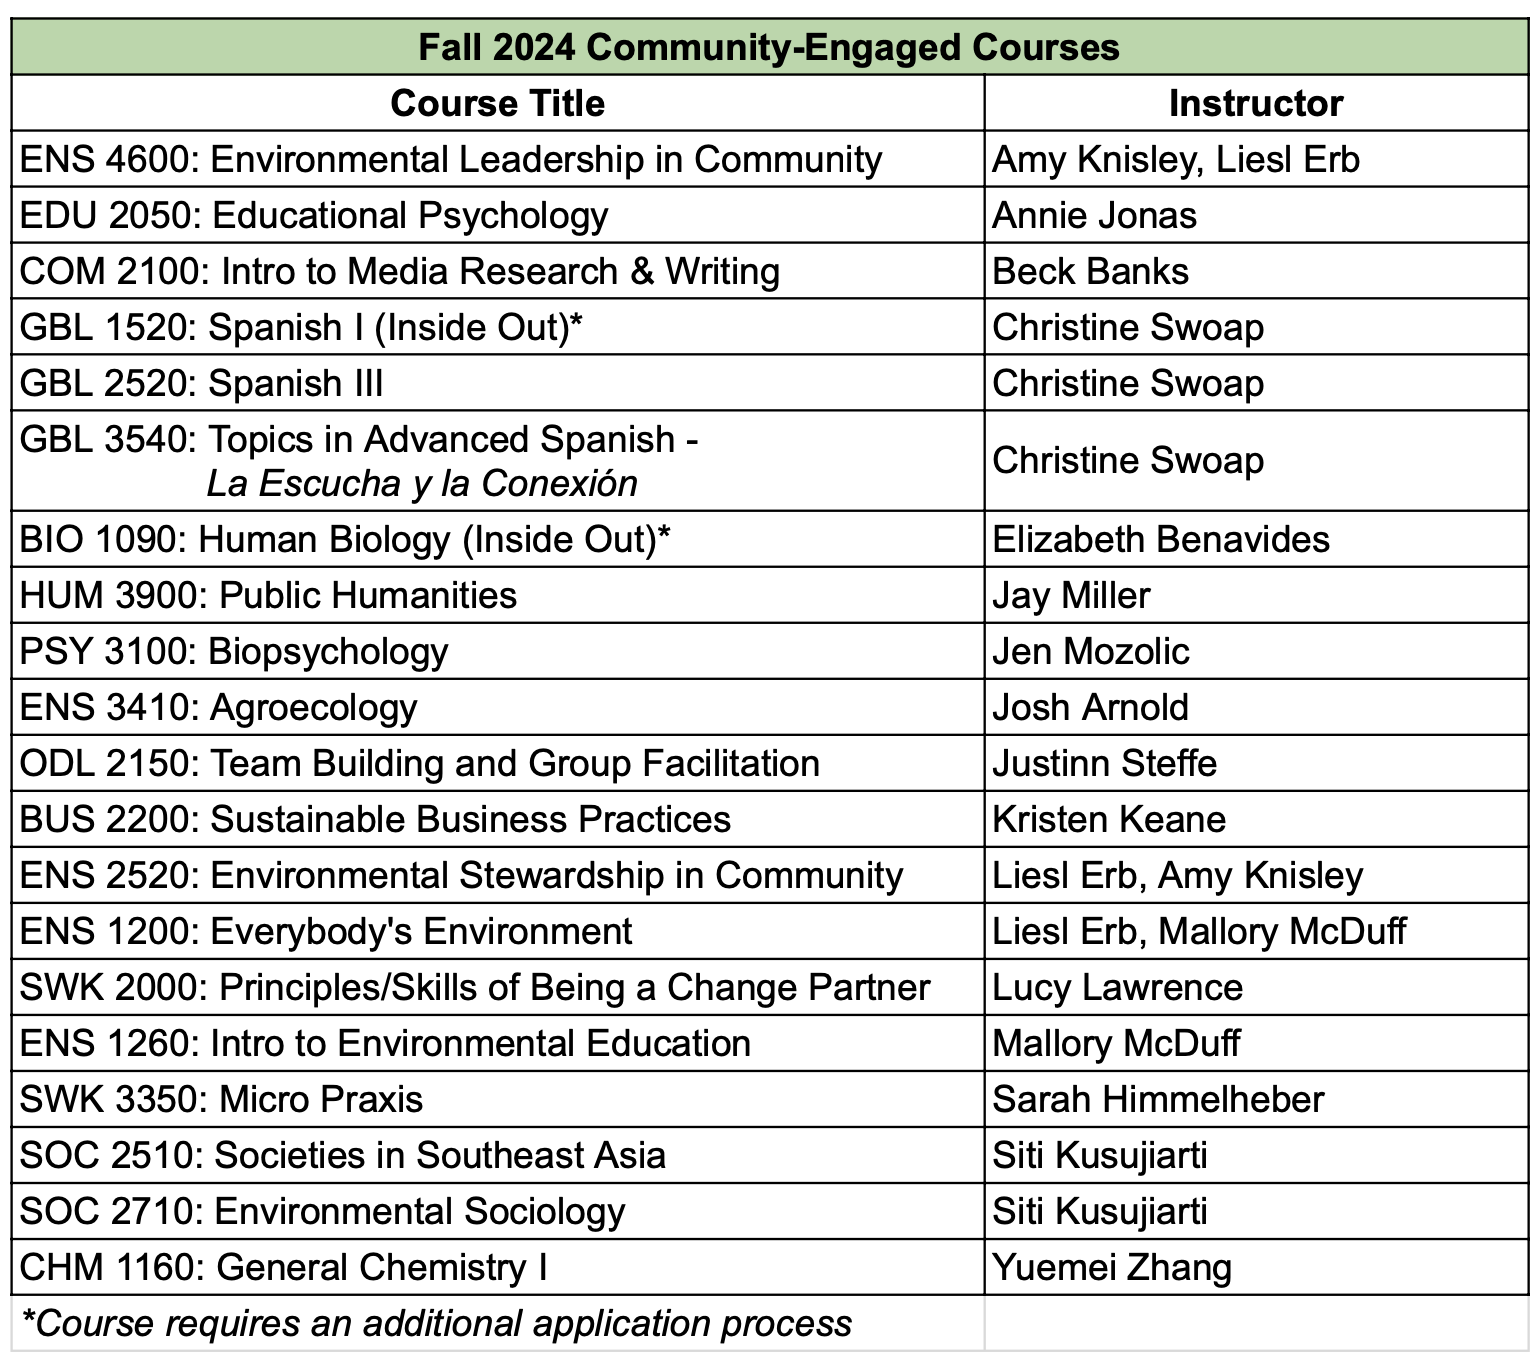 Fall 2024 Community Engaged Courses